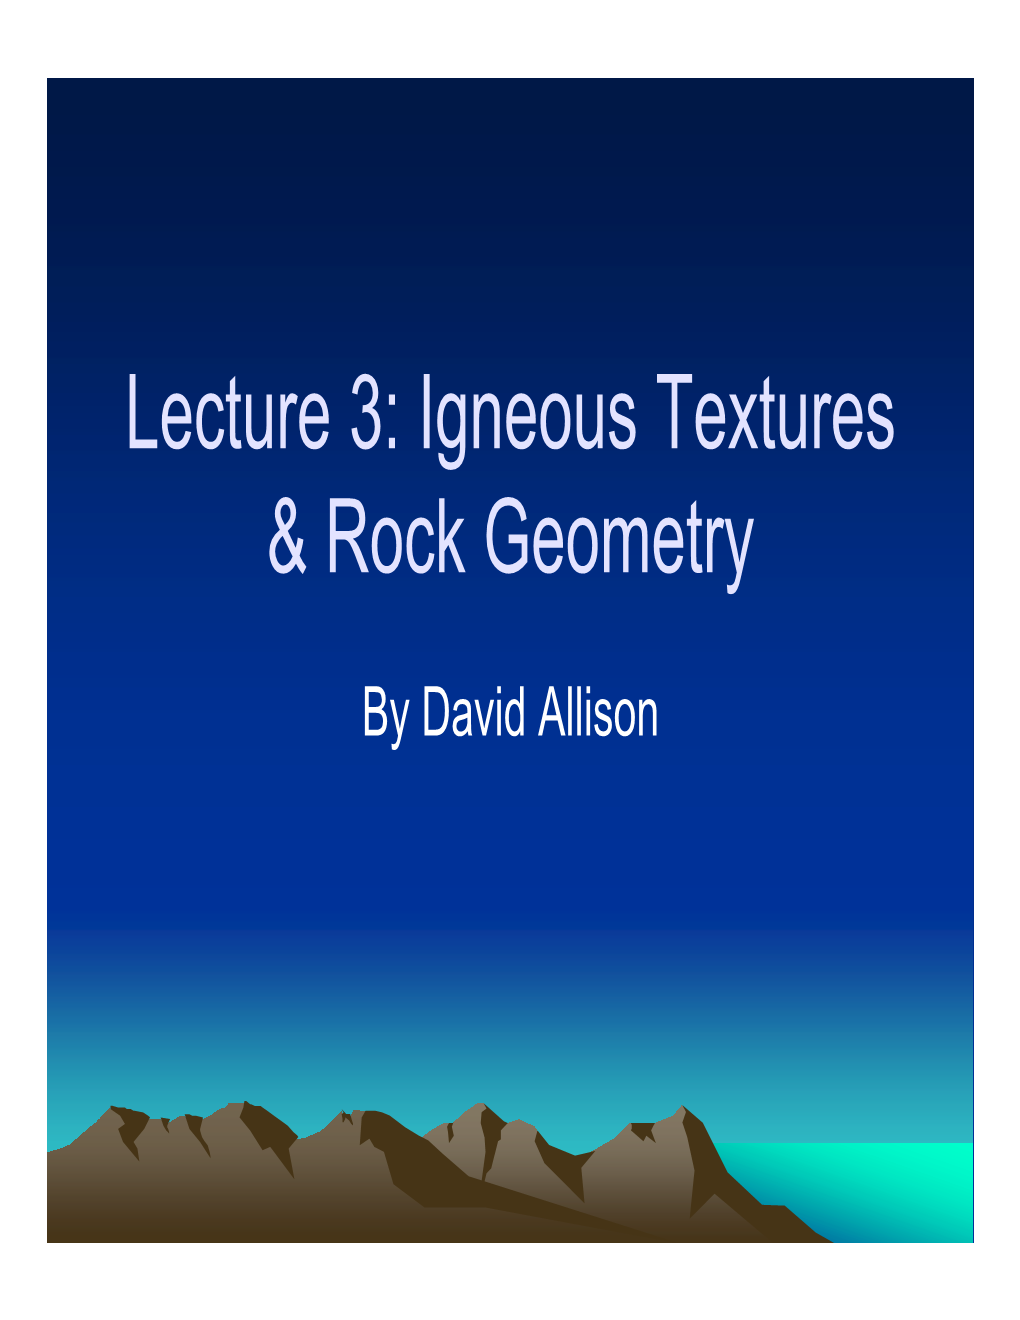 Lecture 3: Igneous Textures & Rock Geometry